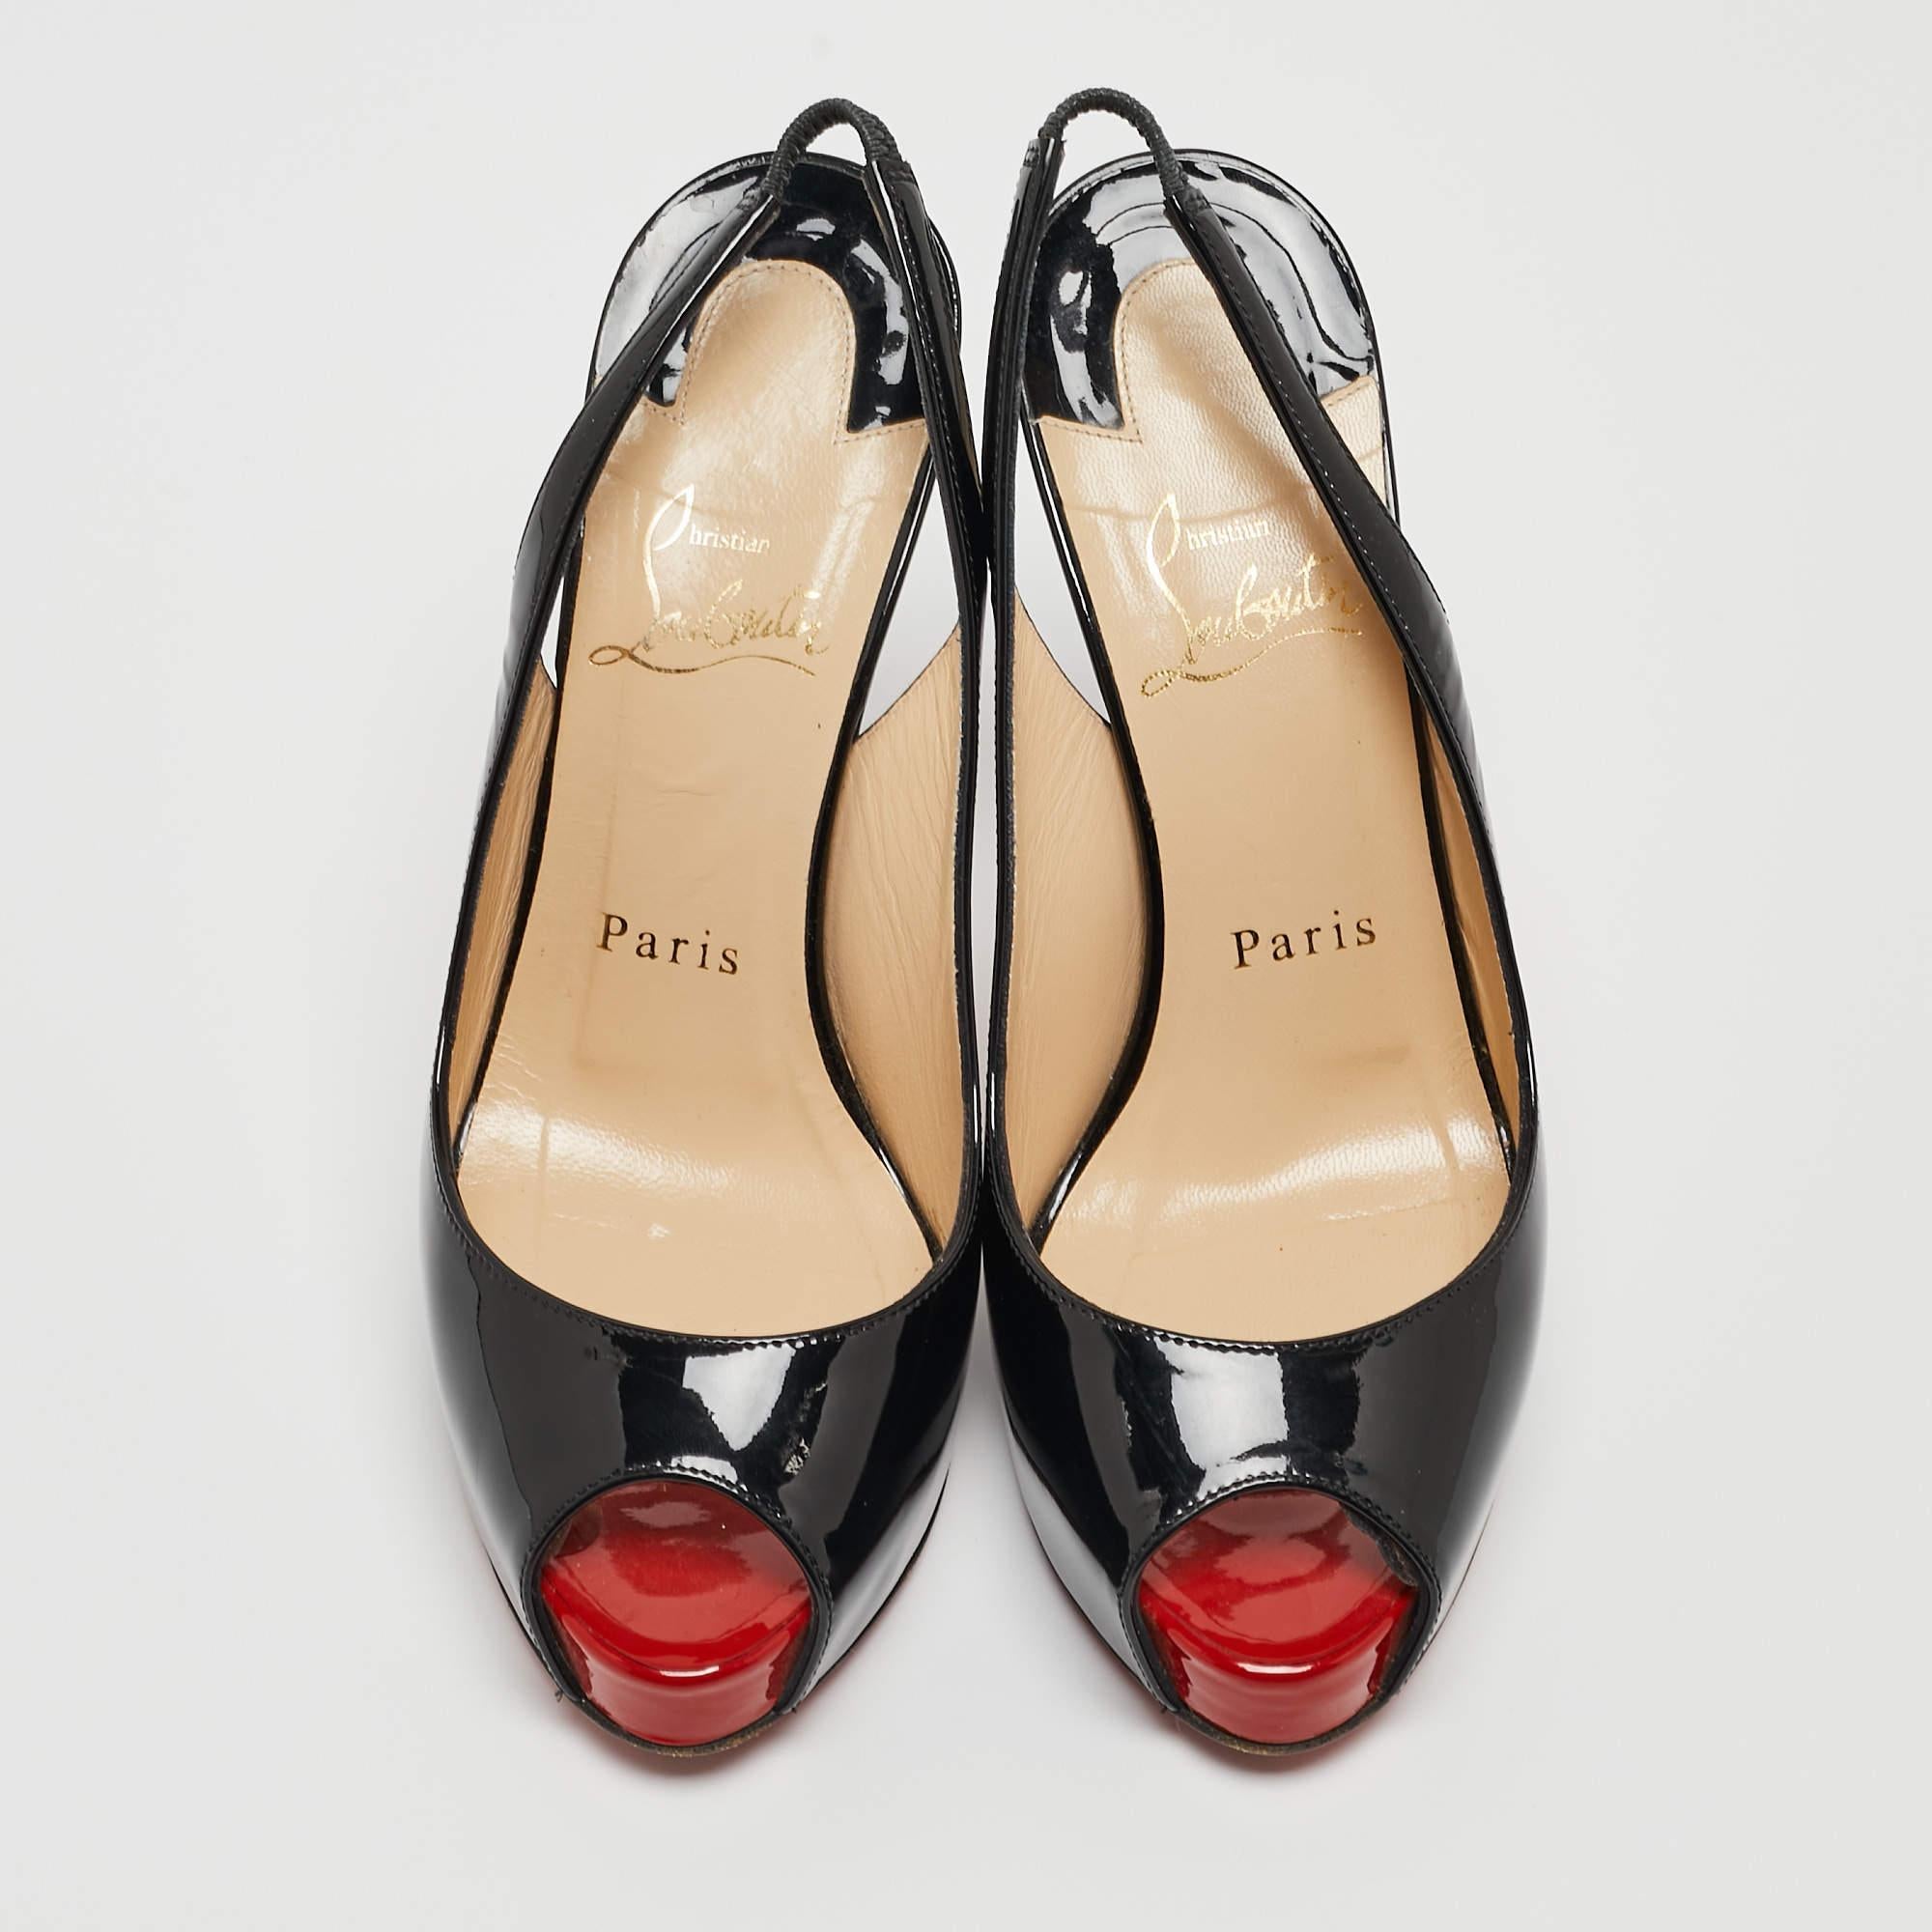 Wear these Christian Louboutin sandals to spruce up any outfit. They are versatile, chic, and can be easily styled. Made using quality materials, these sandals are well-built and long-lasting.

Includes
Original Dustbag